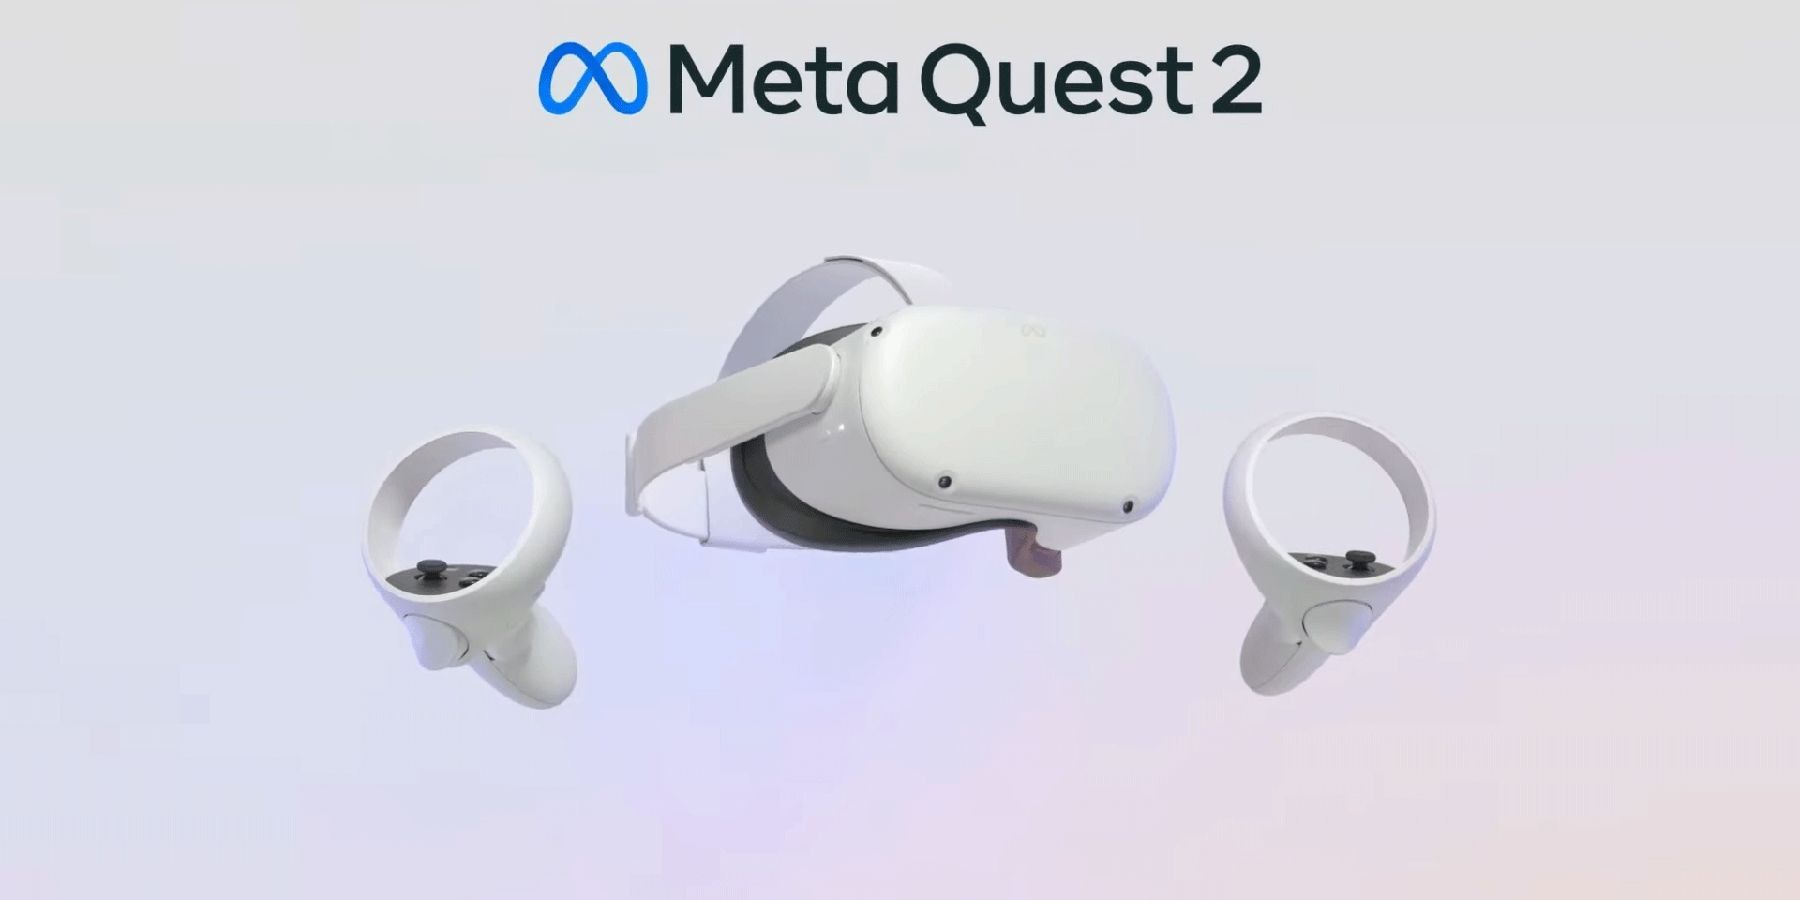 Meta Quest 2 Black Friday Deals Include Price Drop and Free Game